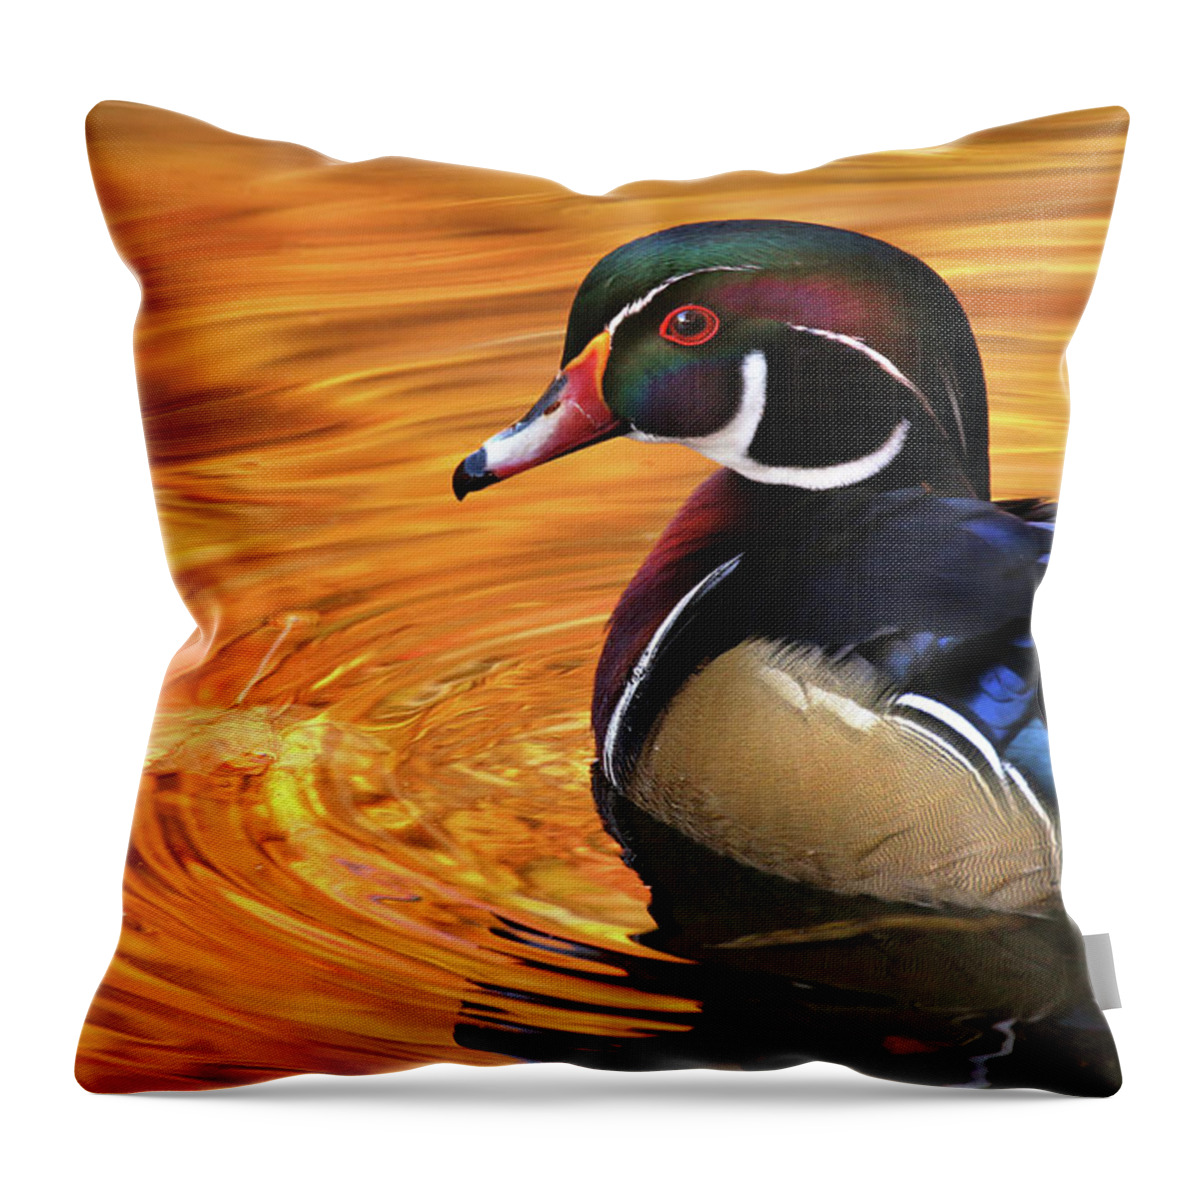  Throw Pillow featuring the photograph Autumn Wood Duck by Rob Blair